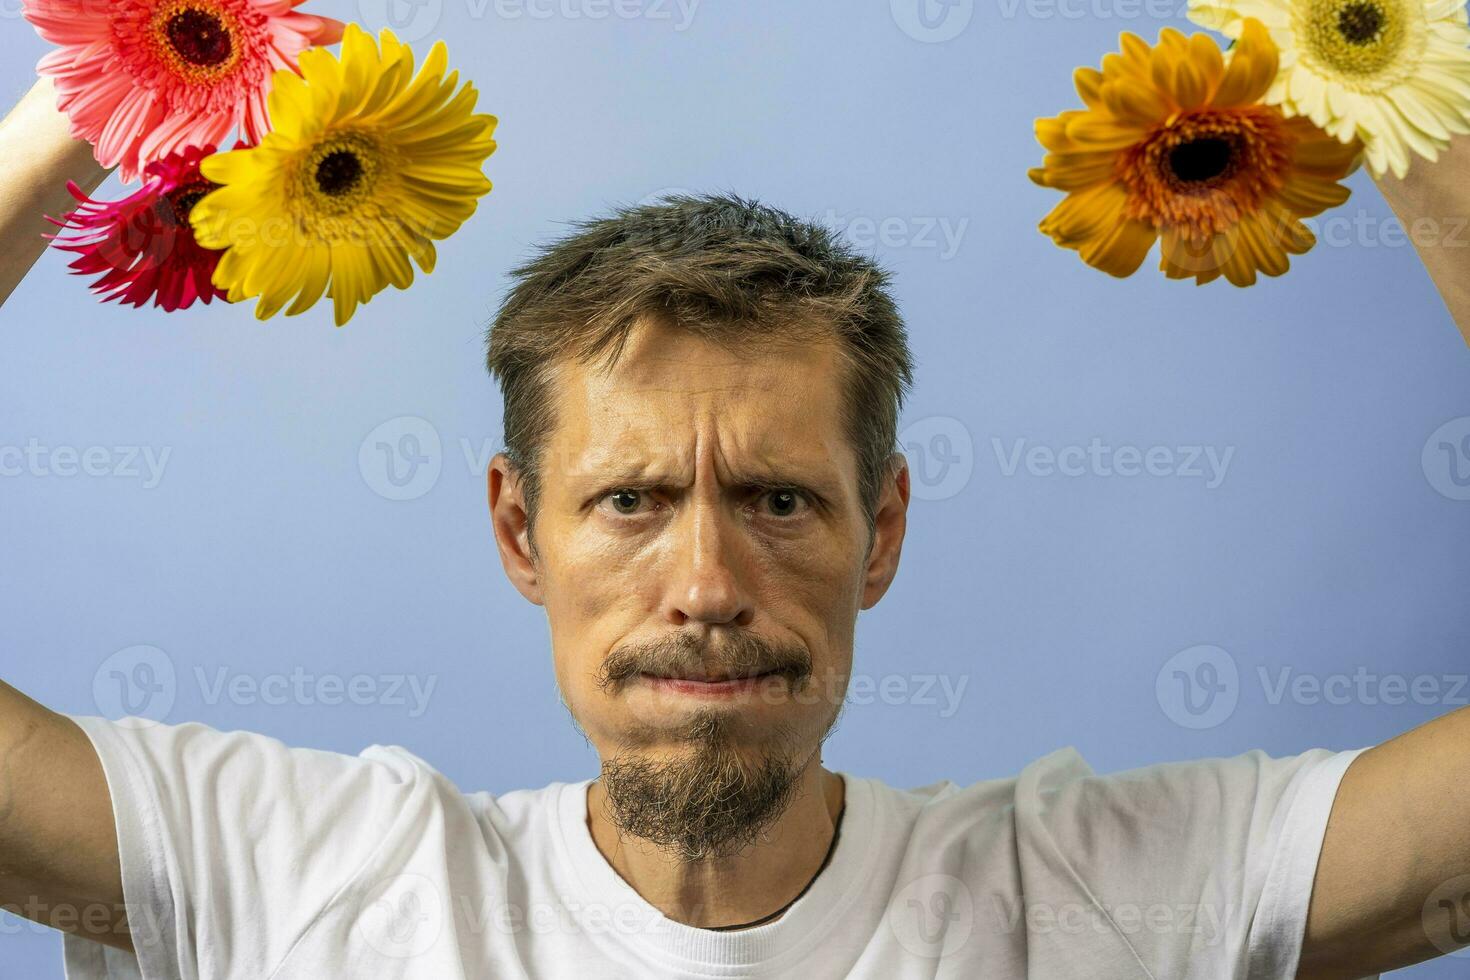 An angry, irritated man in a white T-shirt shakes and swings flowers photo